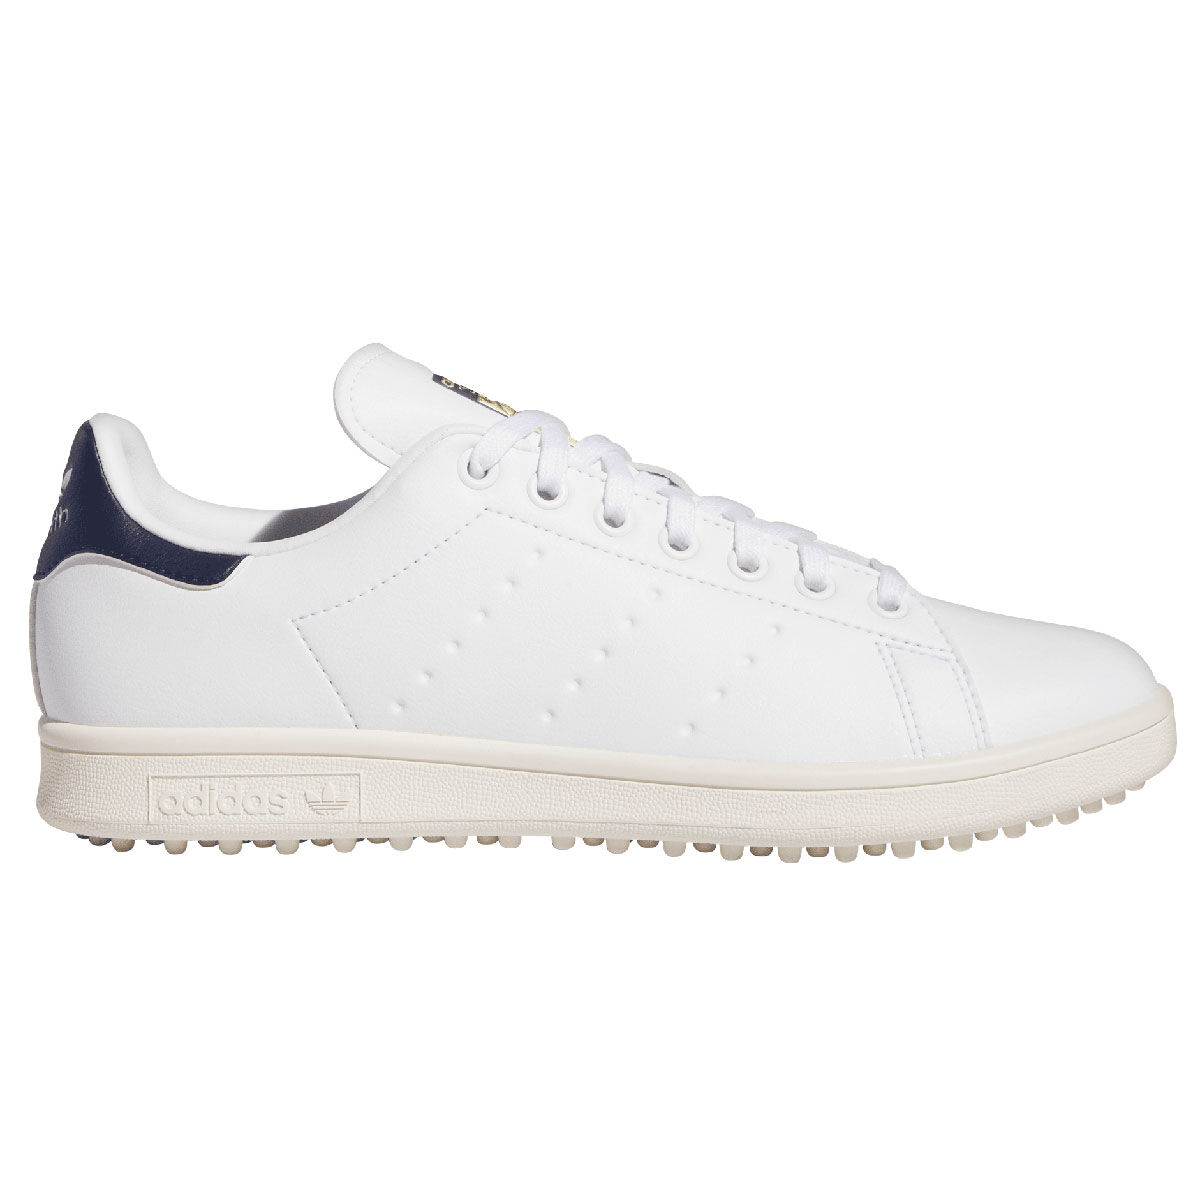 adidas Men’s Stan Smith Waterproof Spikeless Golf Shoes, Mens, White/wonder blue/off white, 9 | American Golf